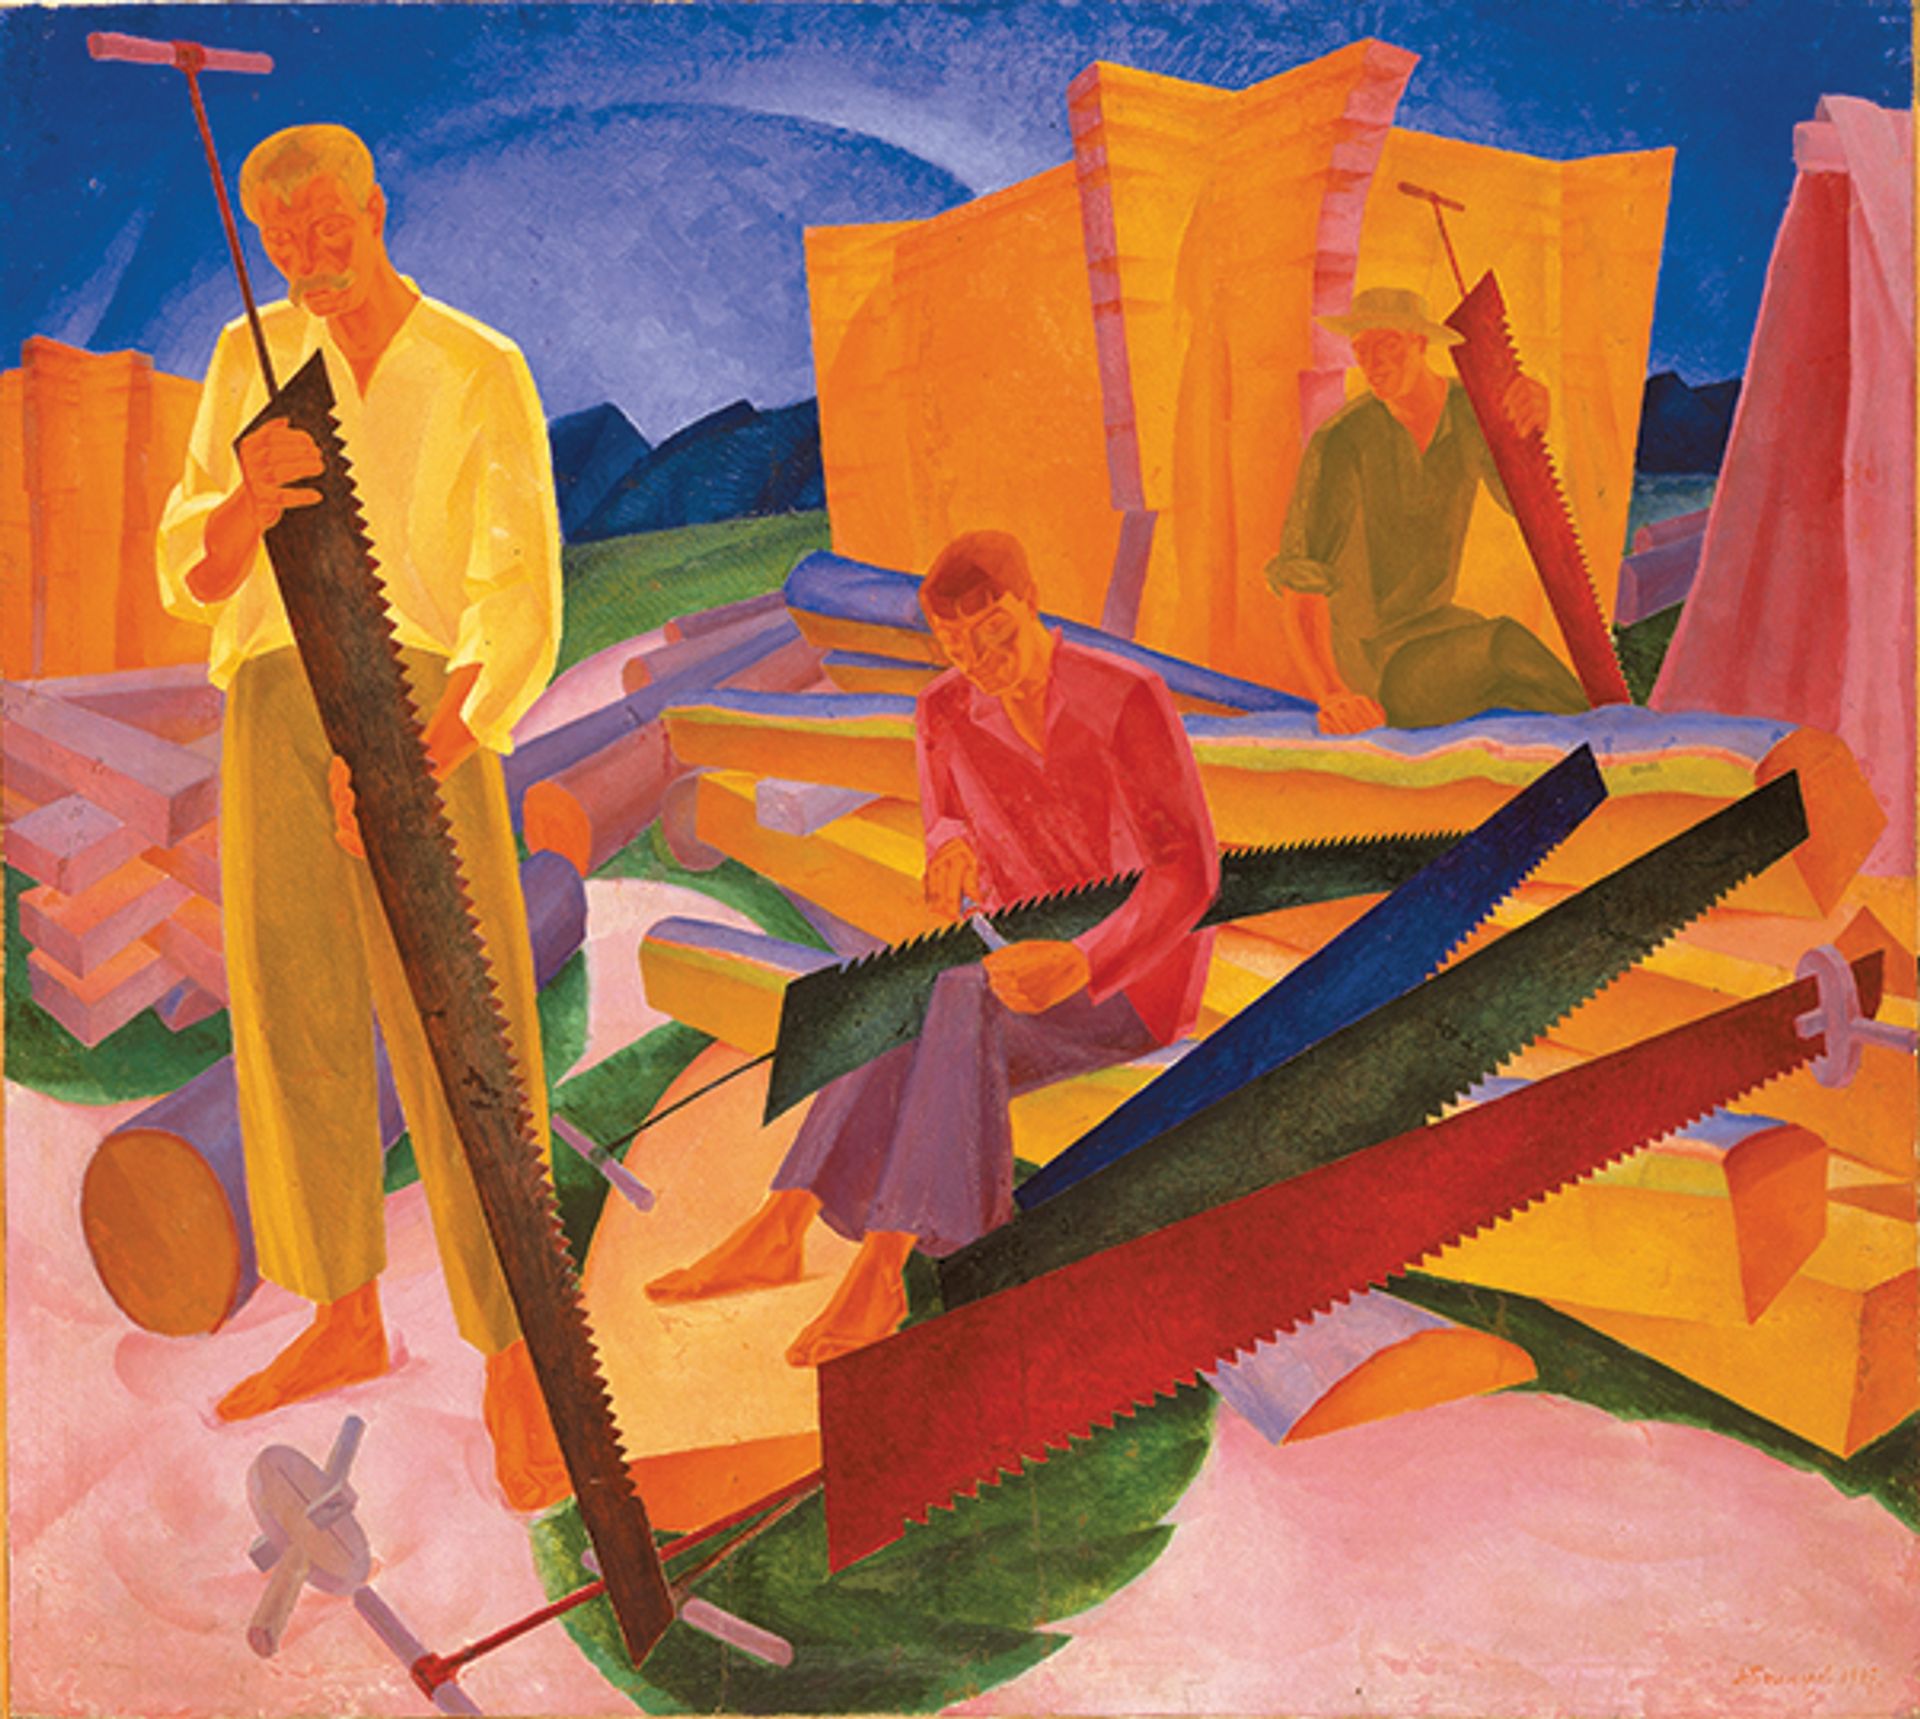 Oleksandr Bohomazov’s Sharpening the Saws (around 1927) features in the show

Courtesy of National Art Museum of Ukraine